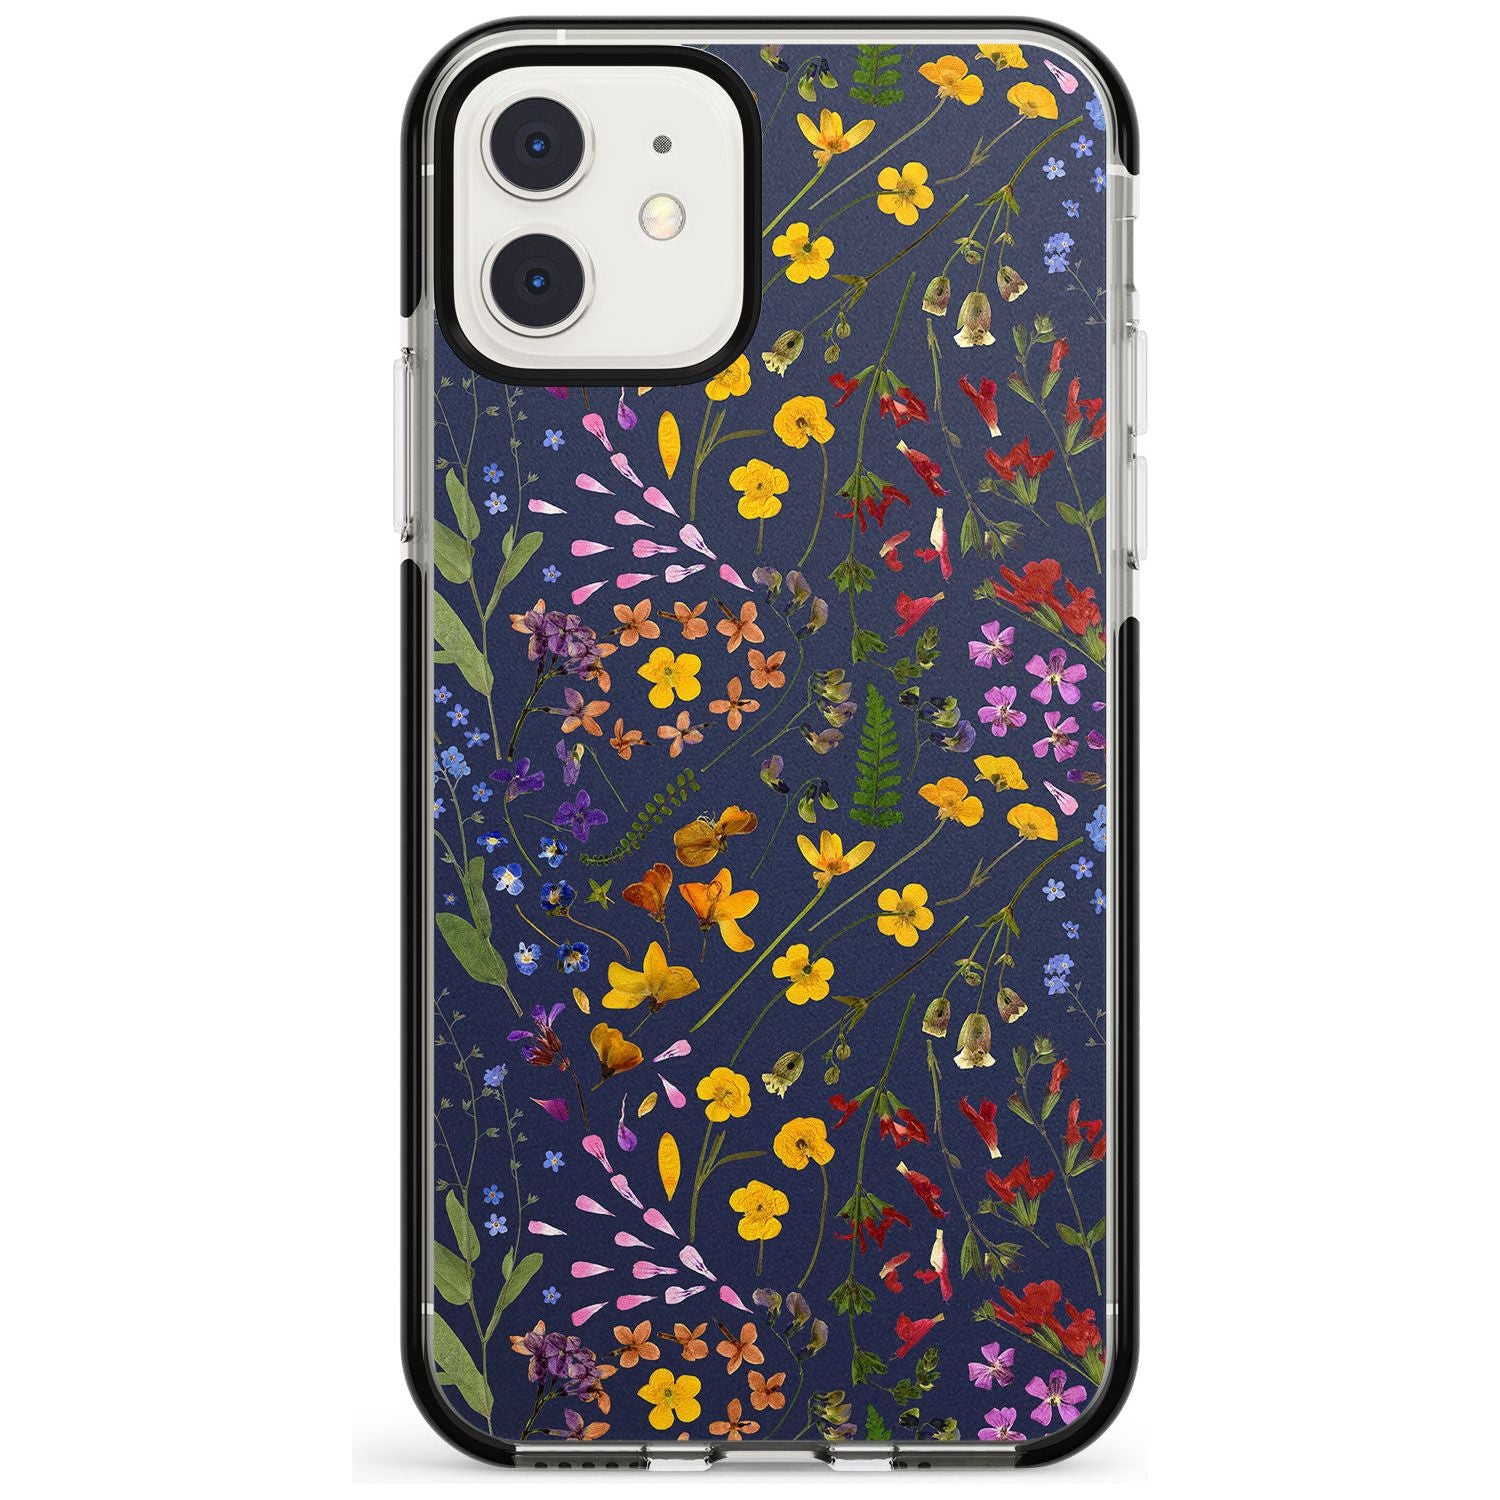 Wildflower & Leaves Cluster Design - Navy Black Impact Phone Case for iPhone 11